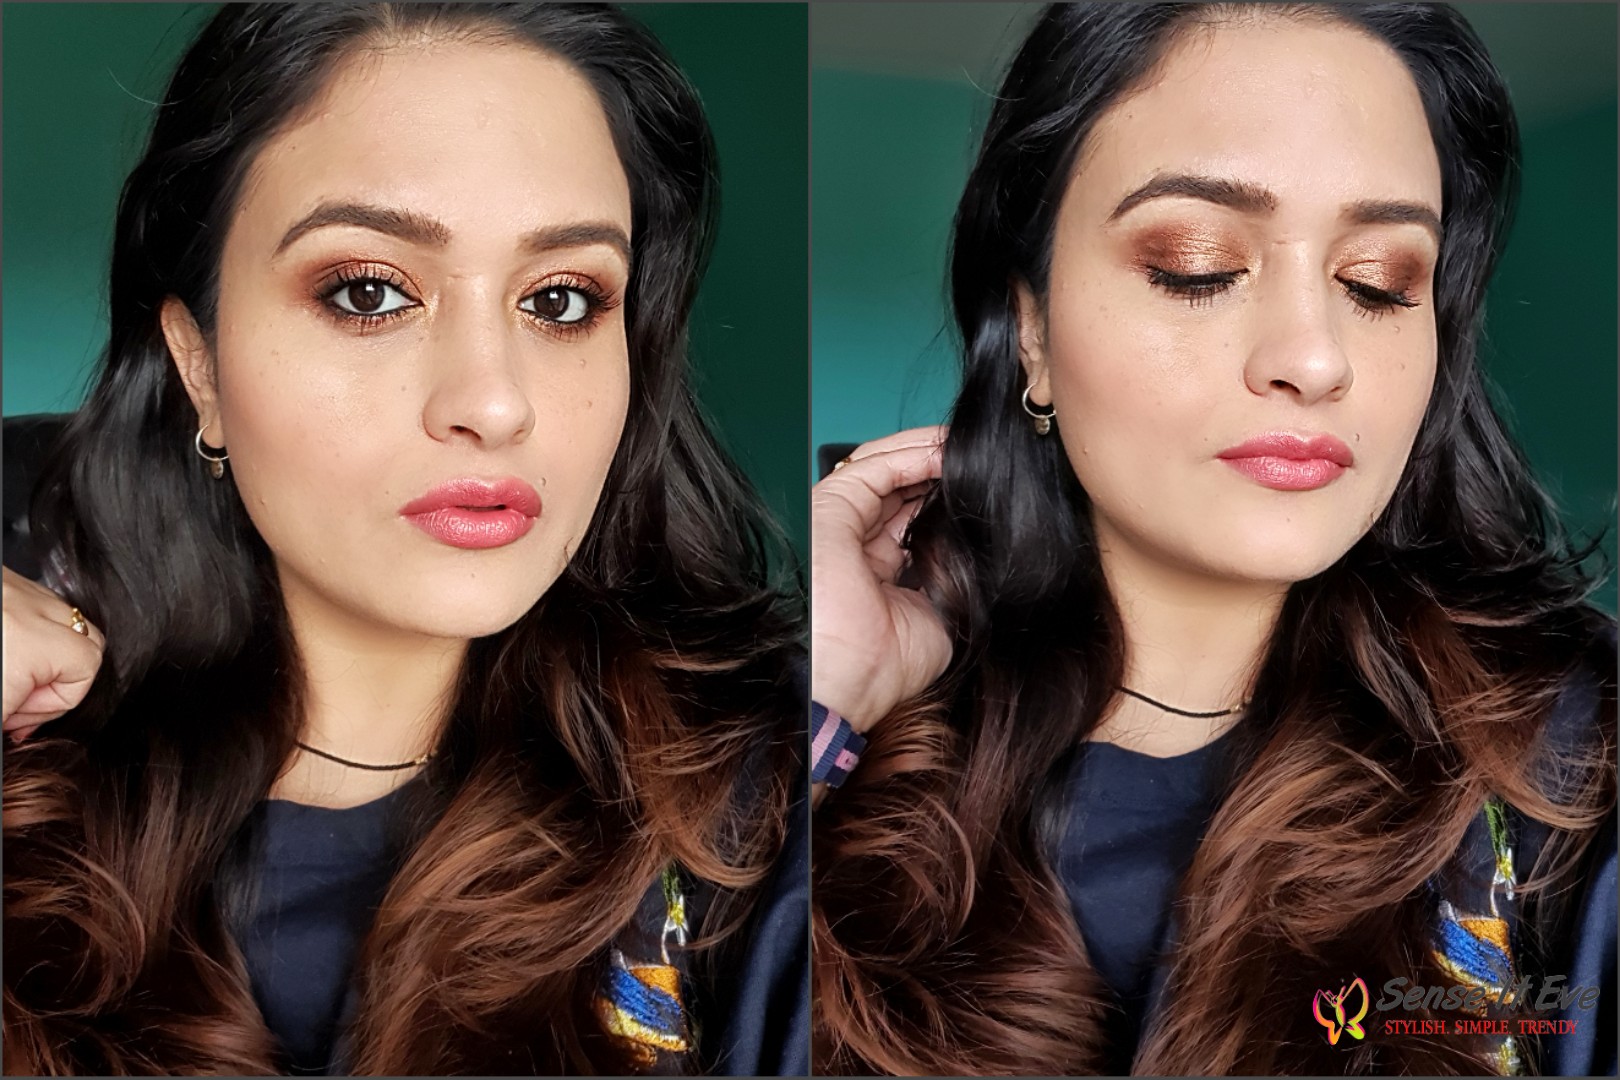 Lakme 9 to 5 Eyeshadow Quartet Tanjore Rush Makeup look 1 Sense It Eve Lakme 9 to 5 Eyeshadow Quartet Tanjore Rush : Review & Swatches